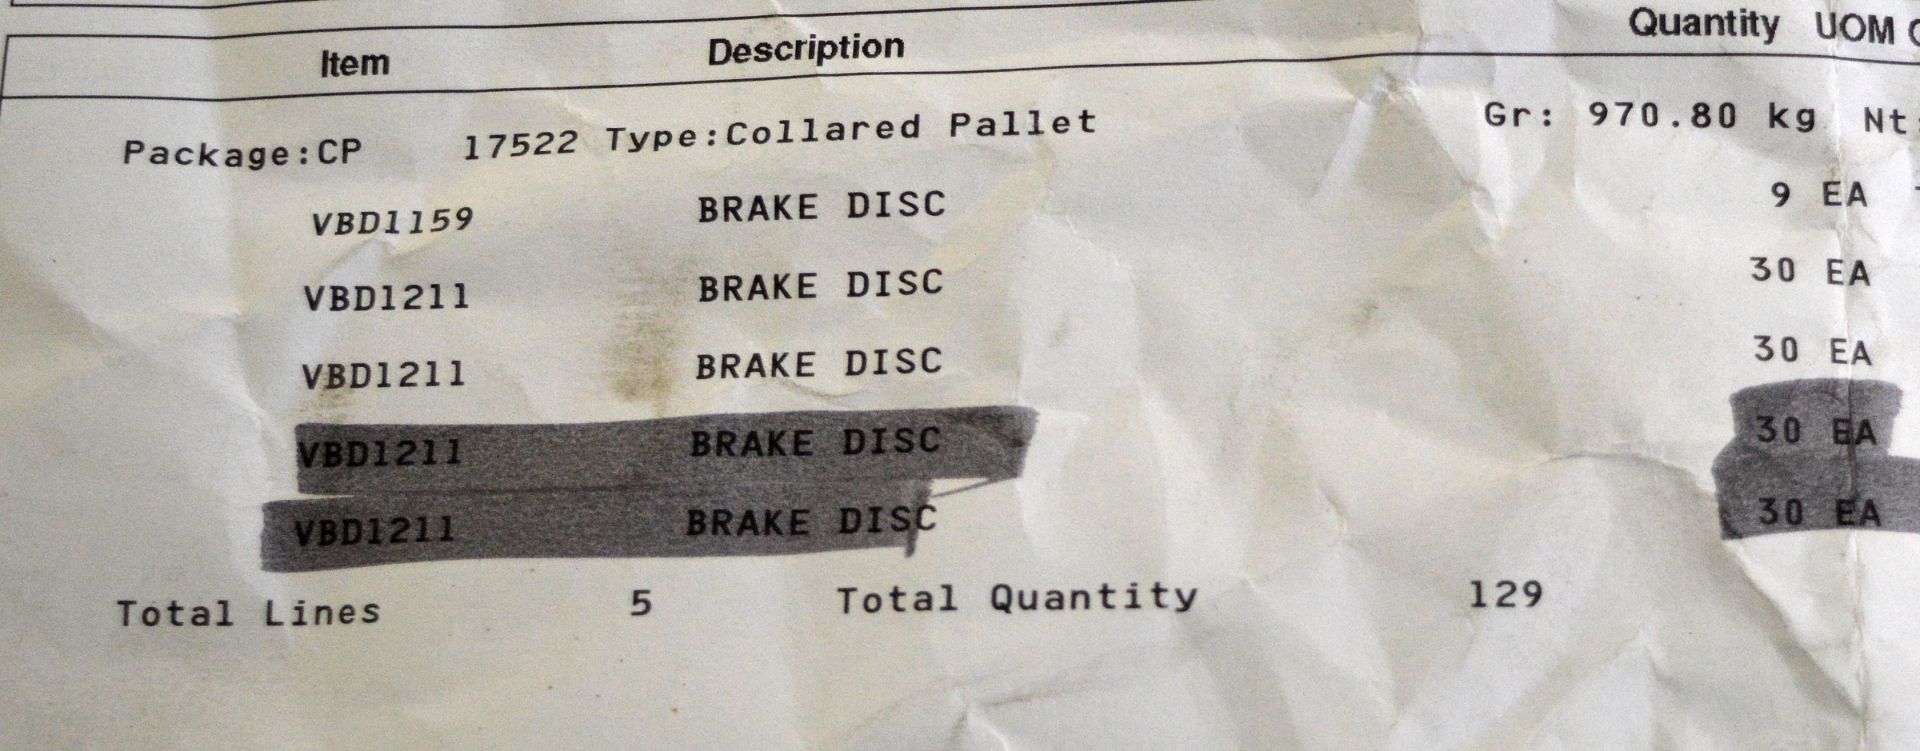 Vehicle parts - Multipart brake discs - see picture for itinerary for model numbers and qu - Image 5 of 5